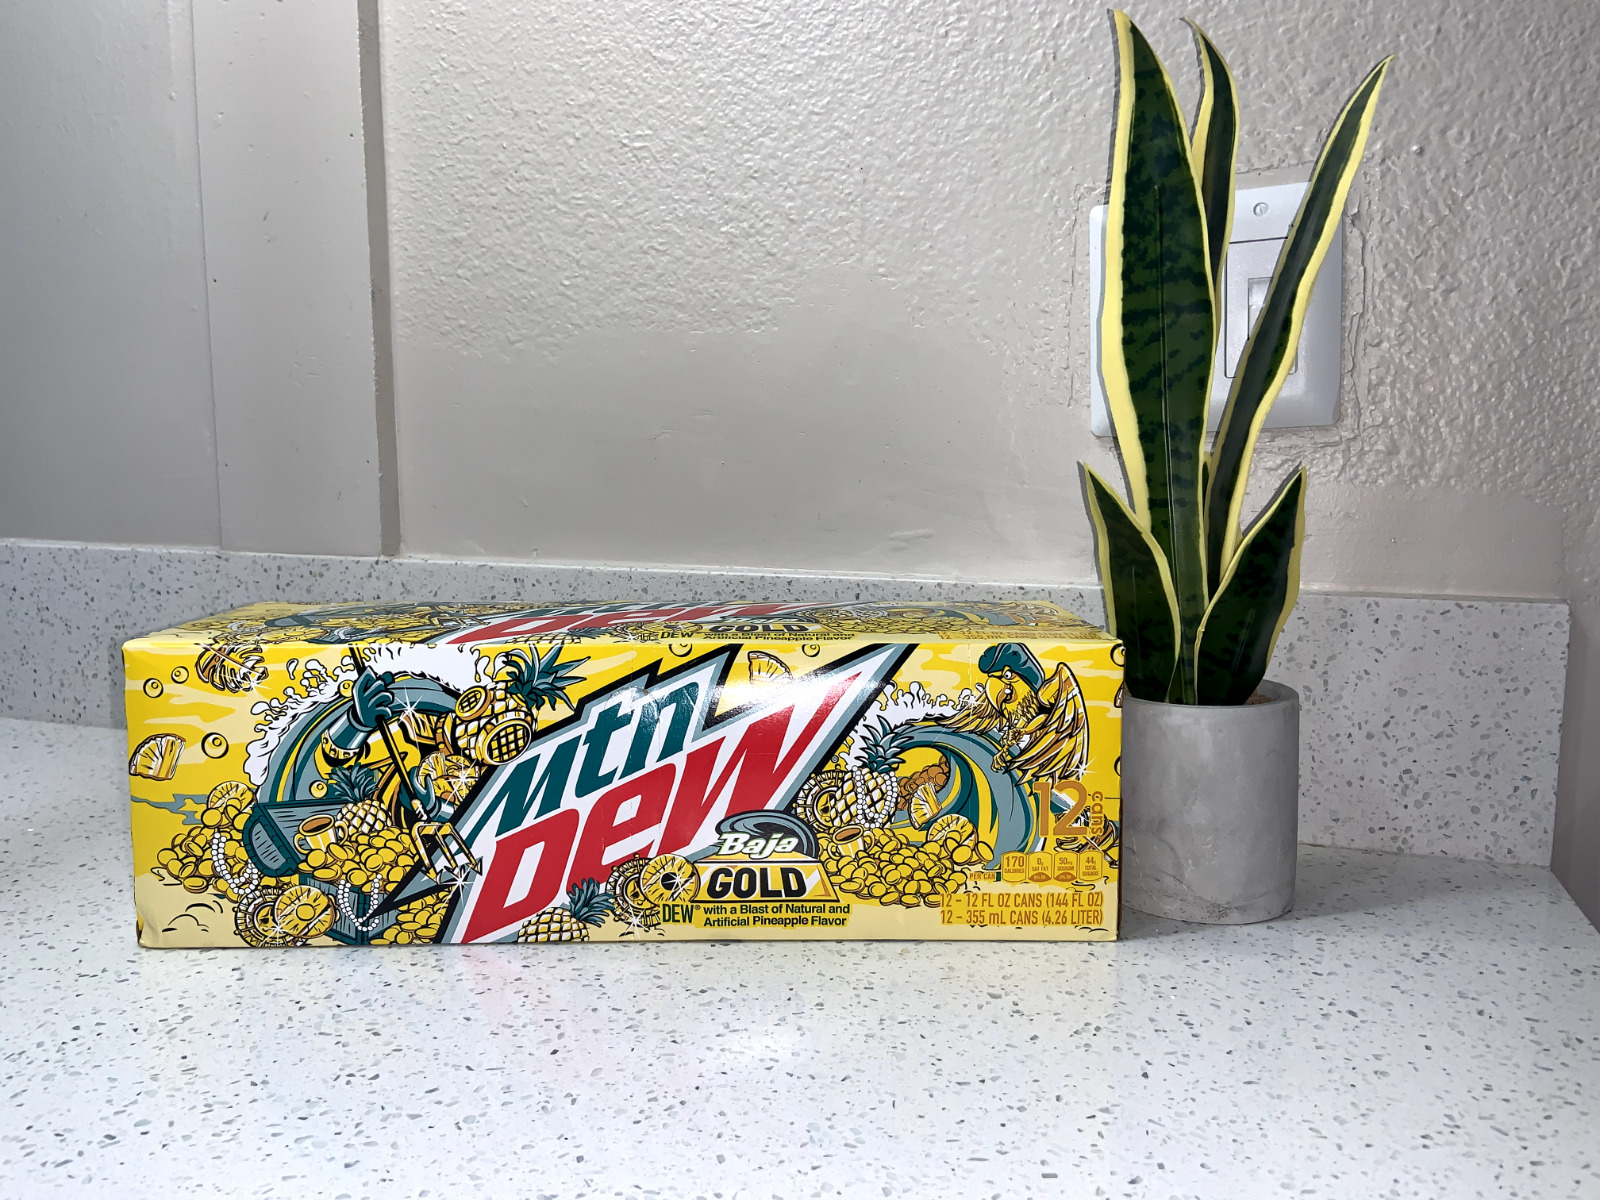 Mountain Dew Baja Gold 12 pack Full 12 oz Cans Sealed pk (EXP 2022)